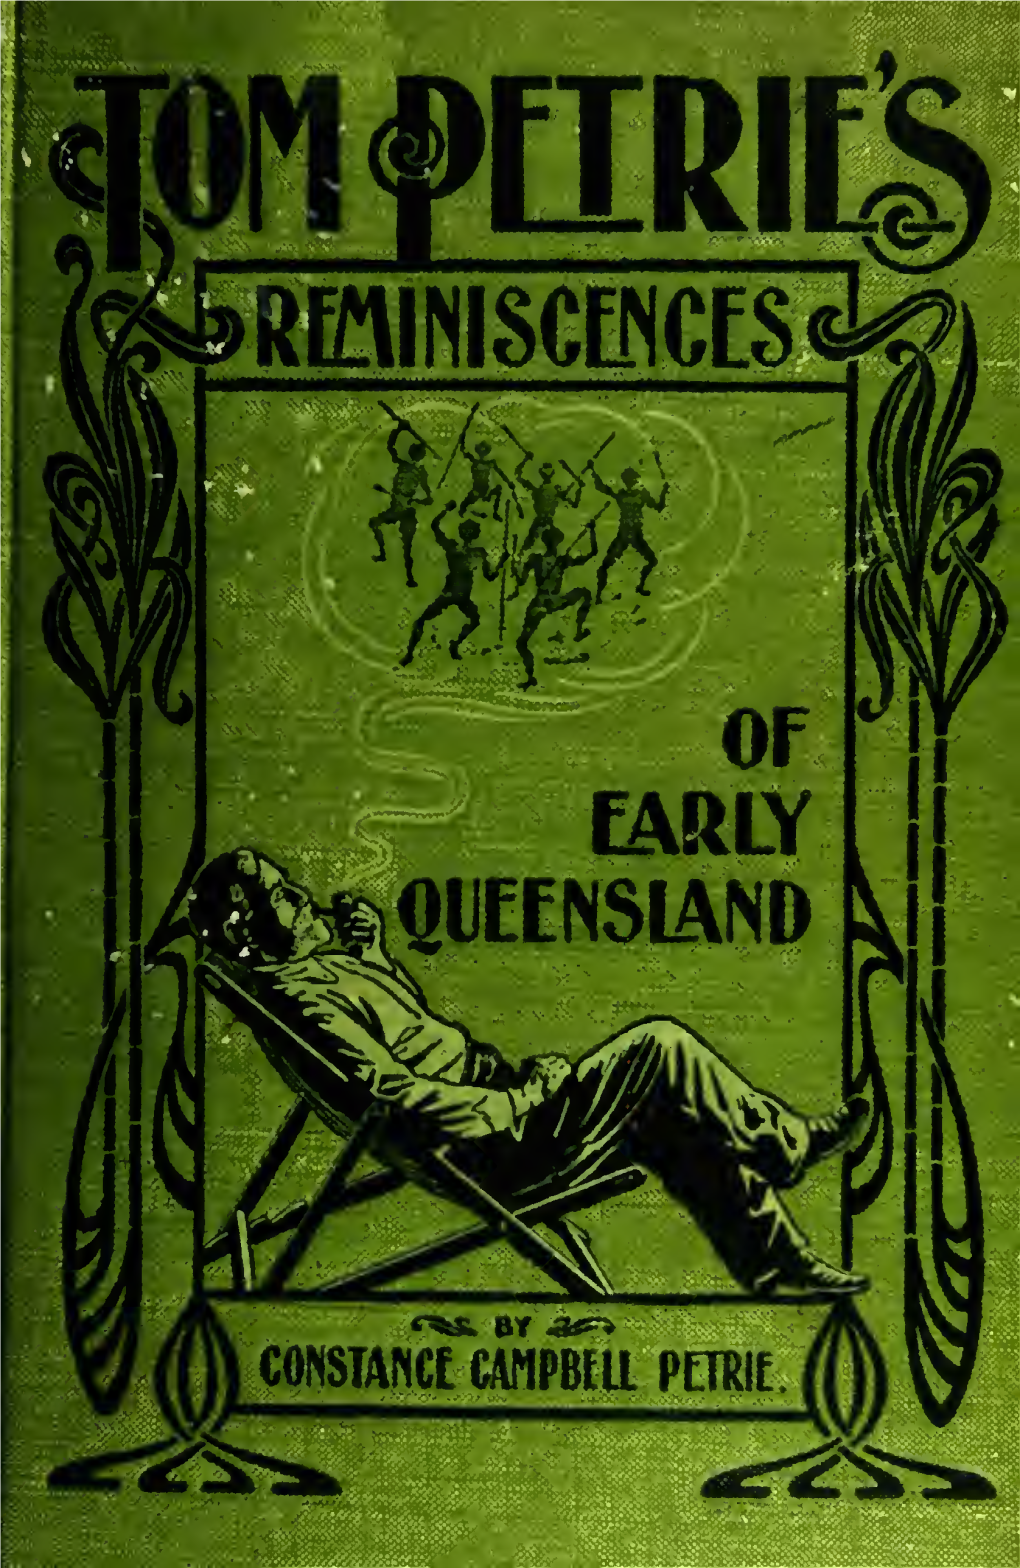 Petrie Reminiscences of Early Queensland